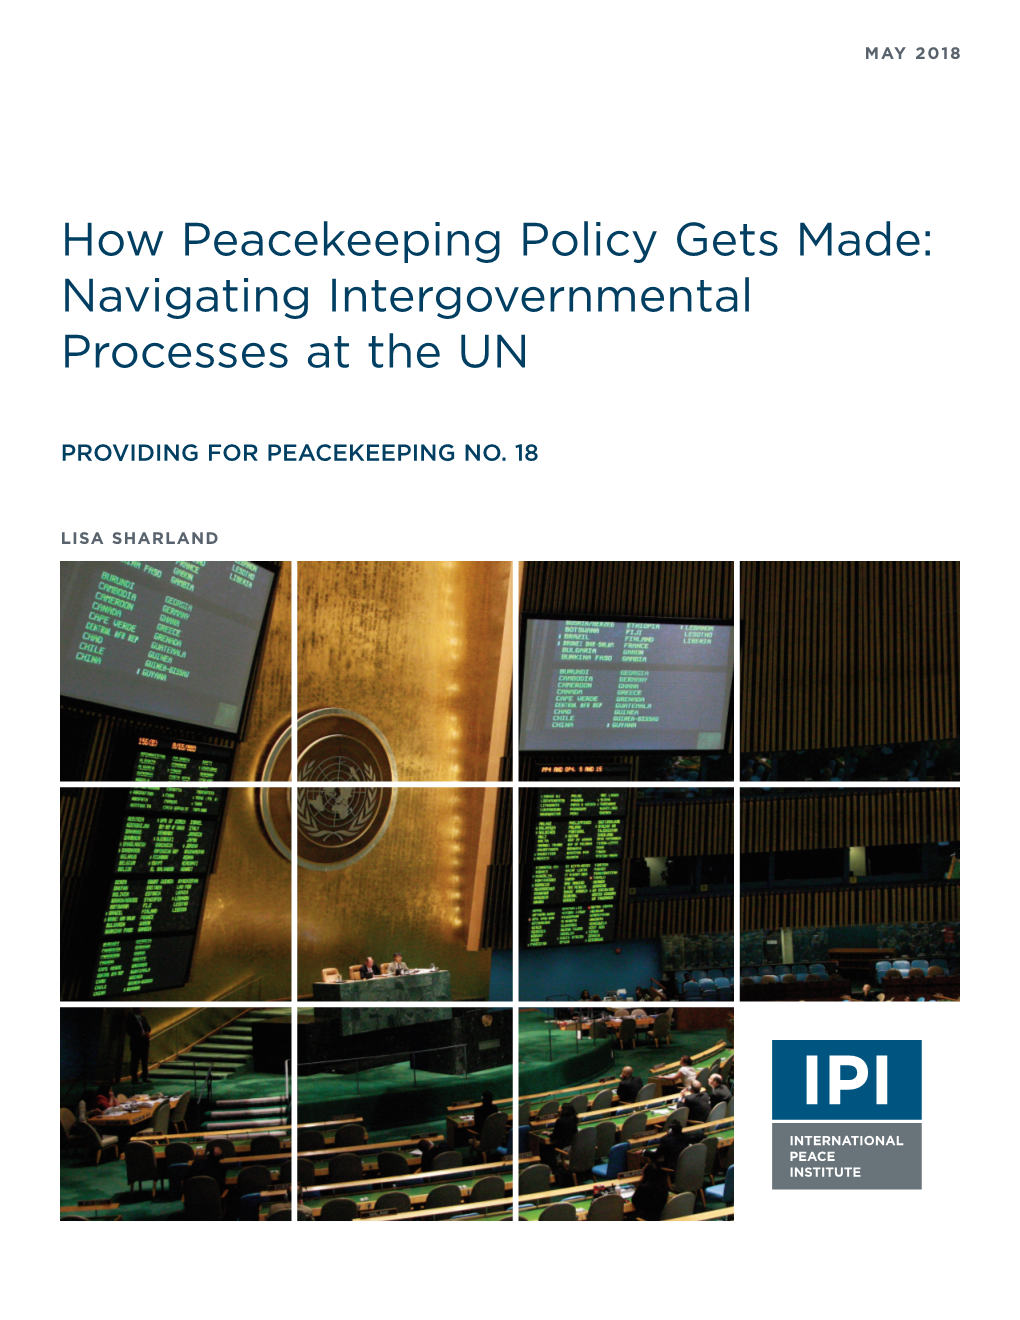 How Peacekeeping Policy Gets Made: Navigating Intergovernmental Processes at the UN